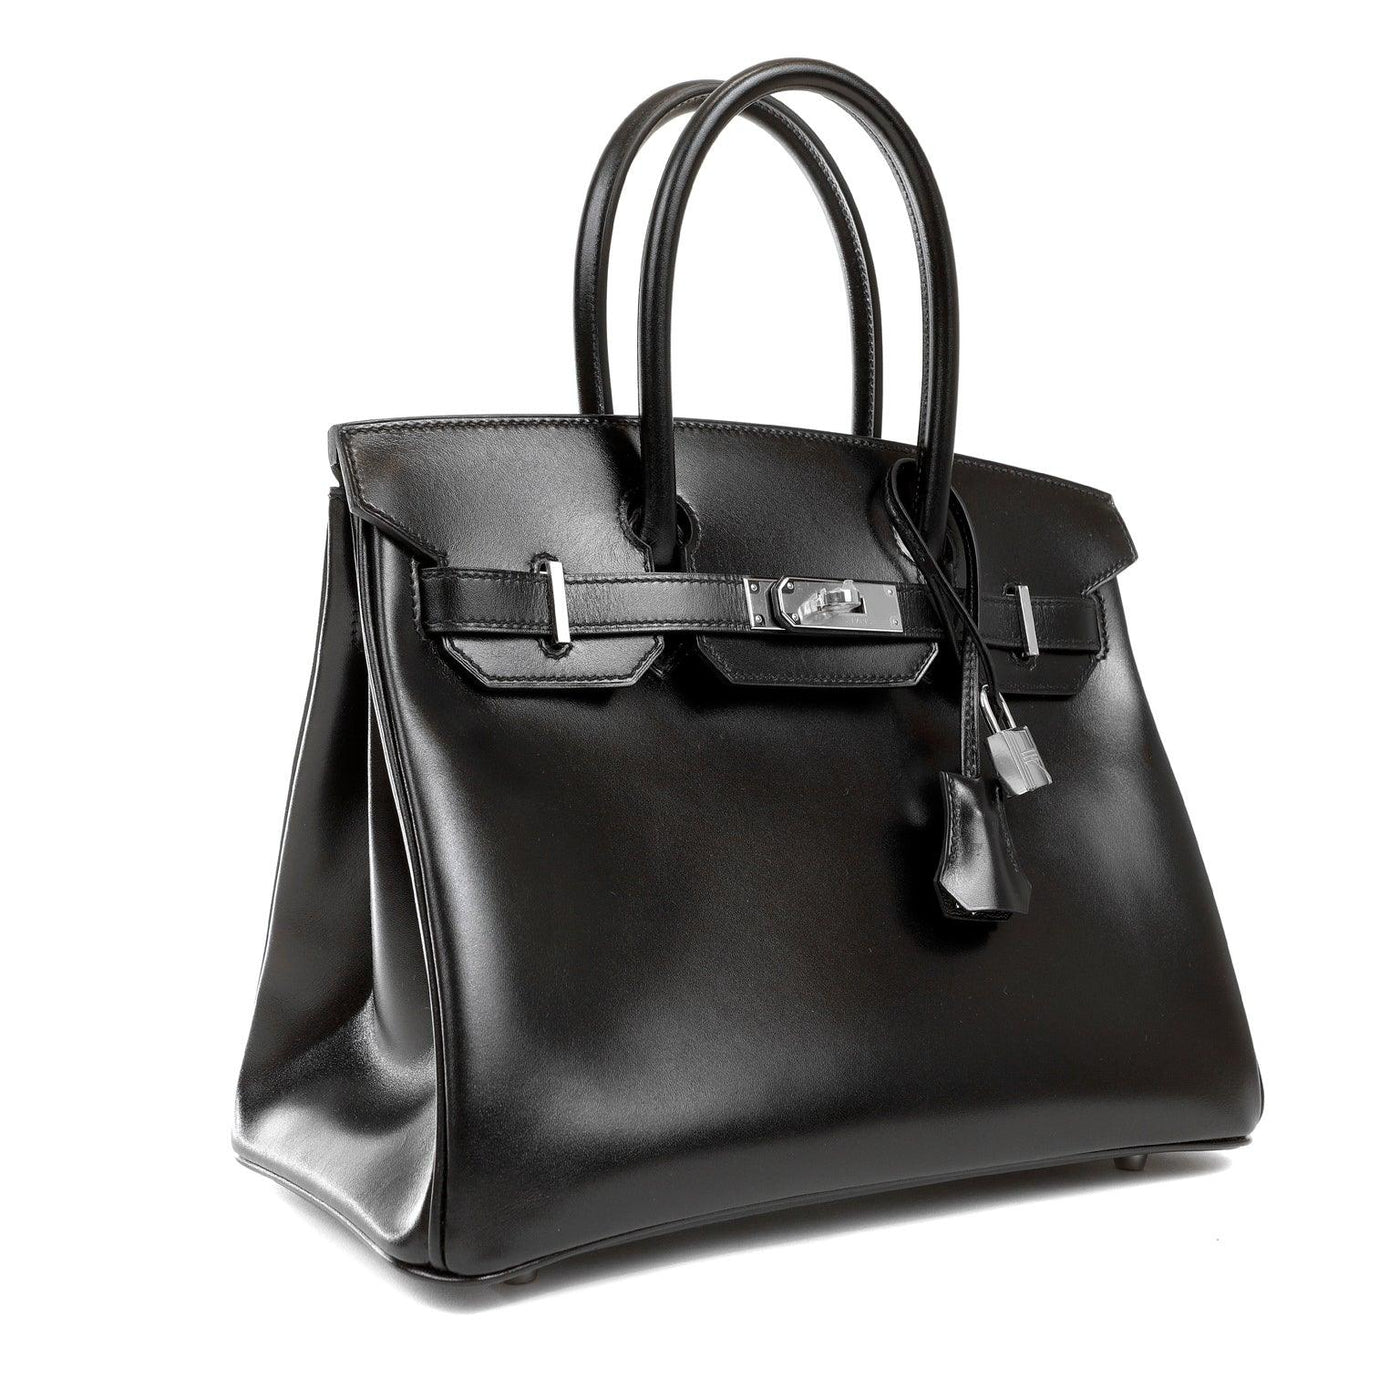 This exquisite Hermès Birkin is crafted from sleek black box calf